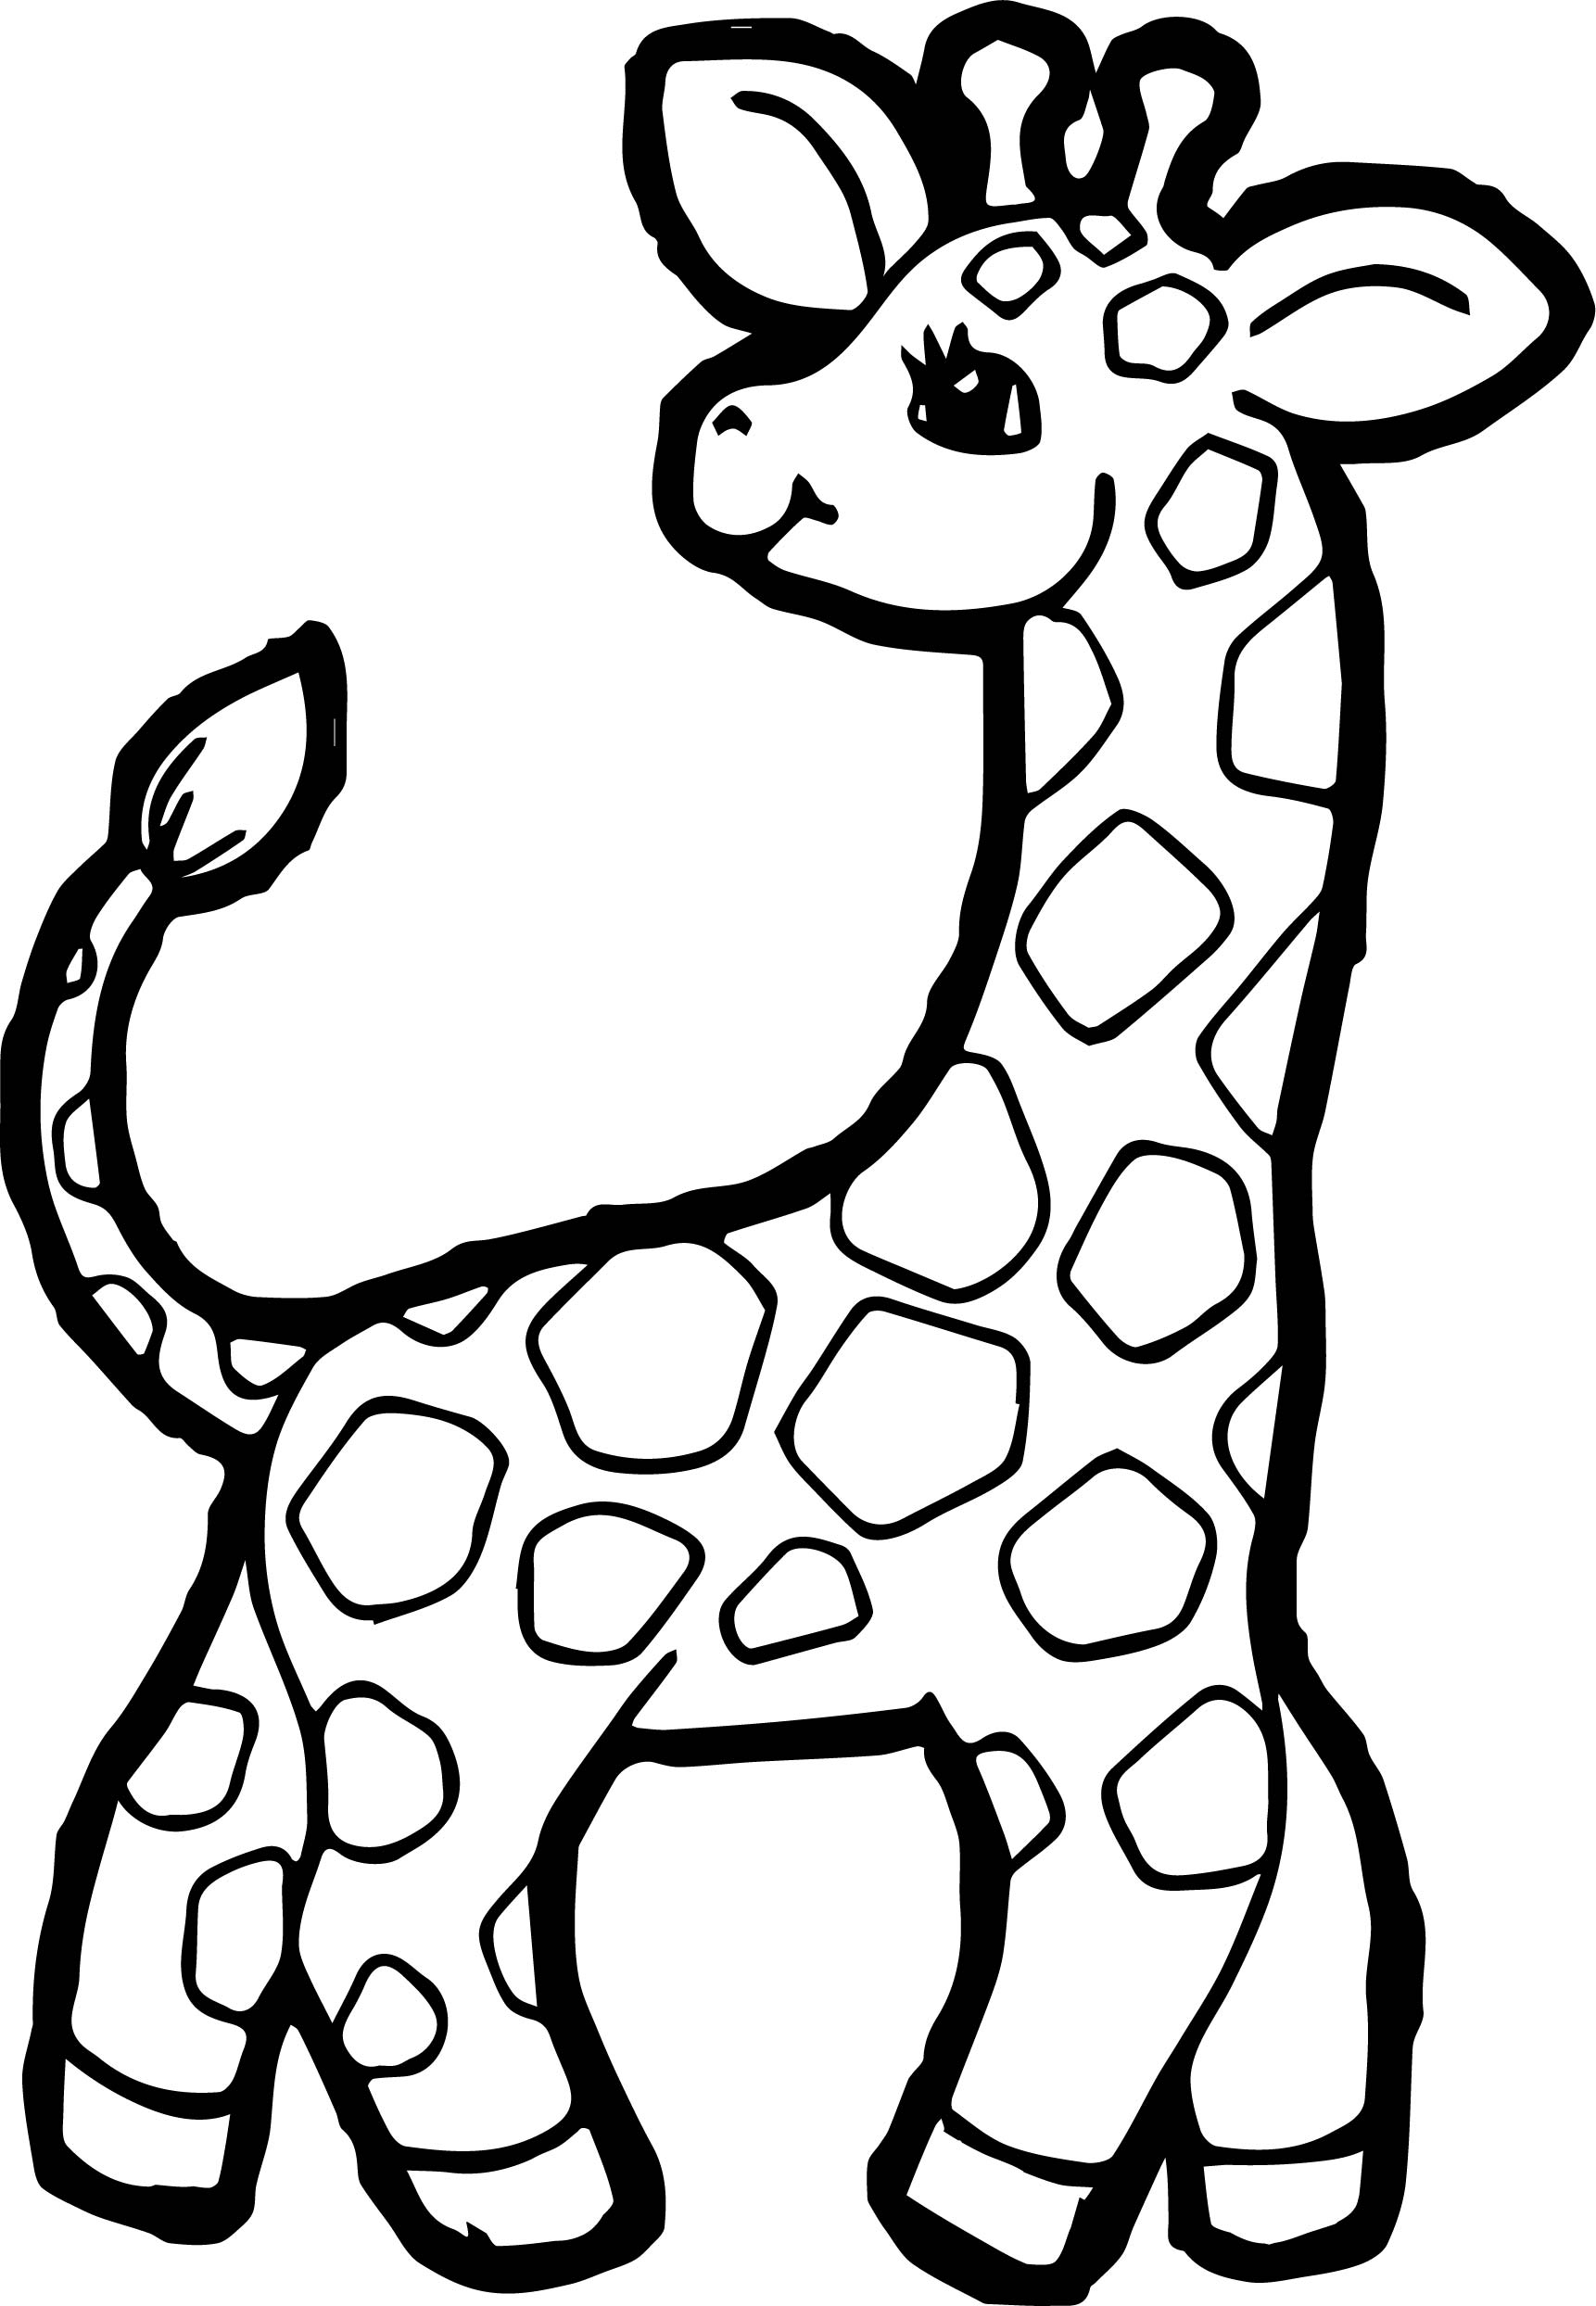 Giraffe Coloring Pages | Free download on ClipArtMag